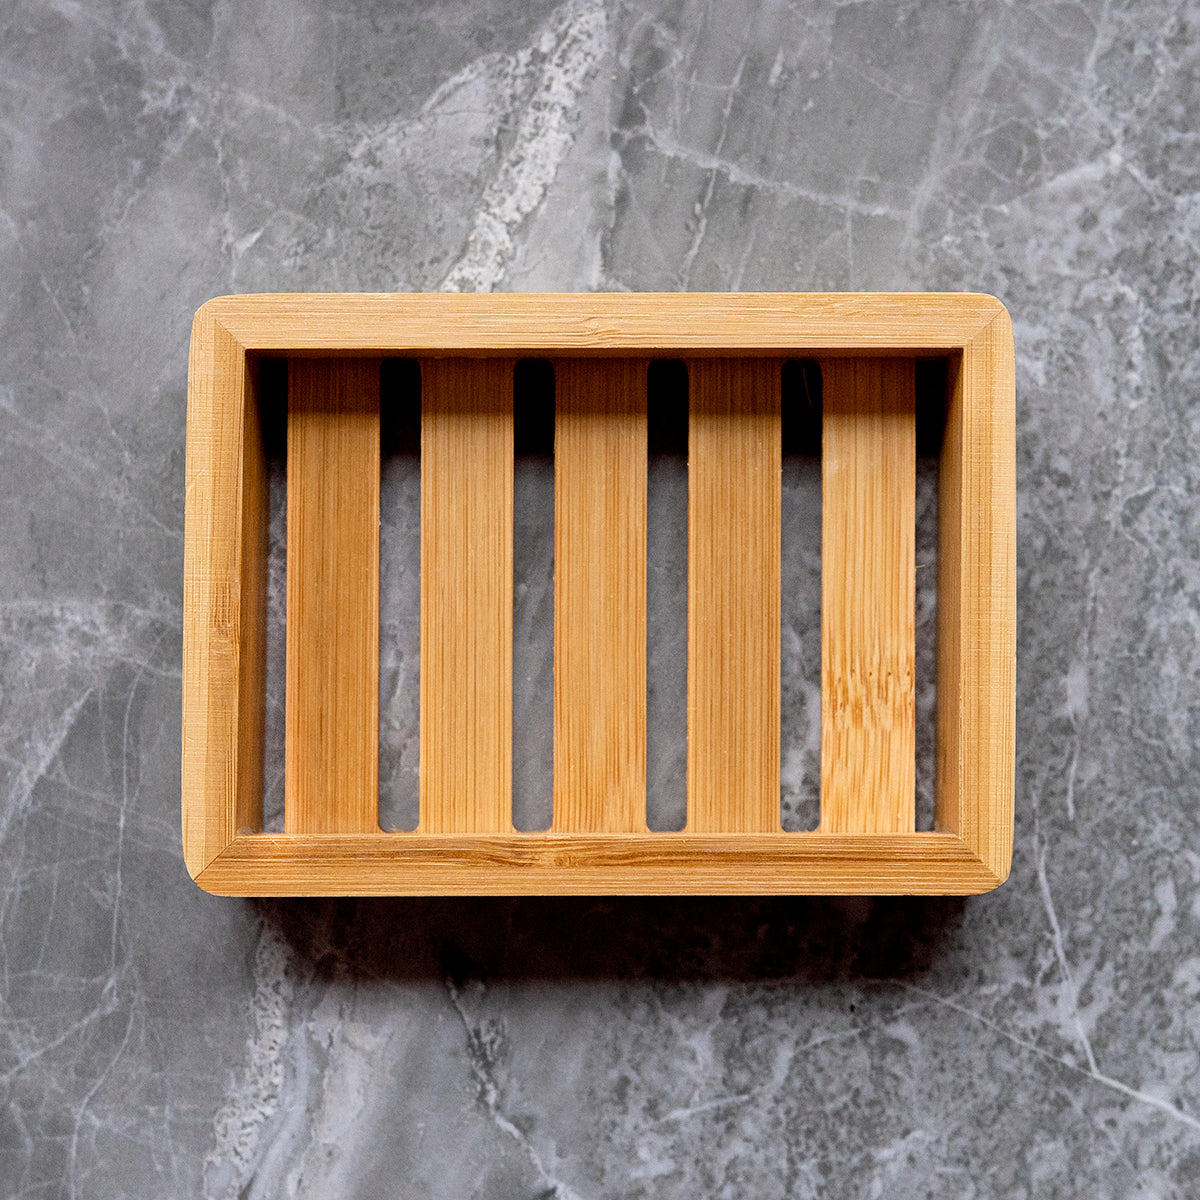 A bamboo soap dish with slats for drainage, viewed from above, set against a grey marble background.